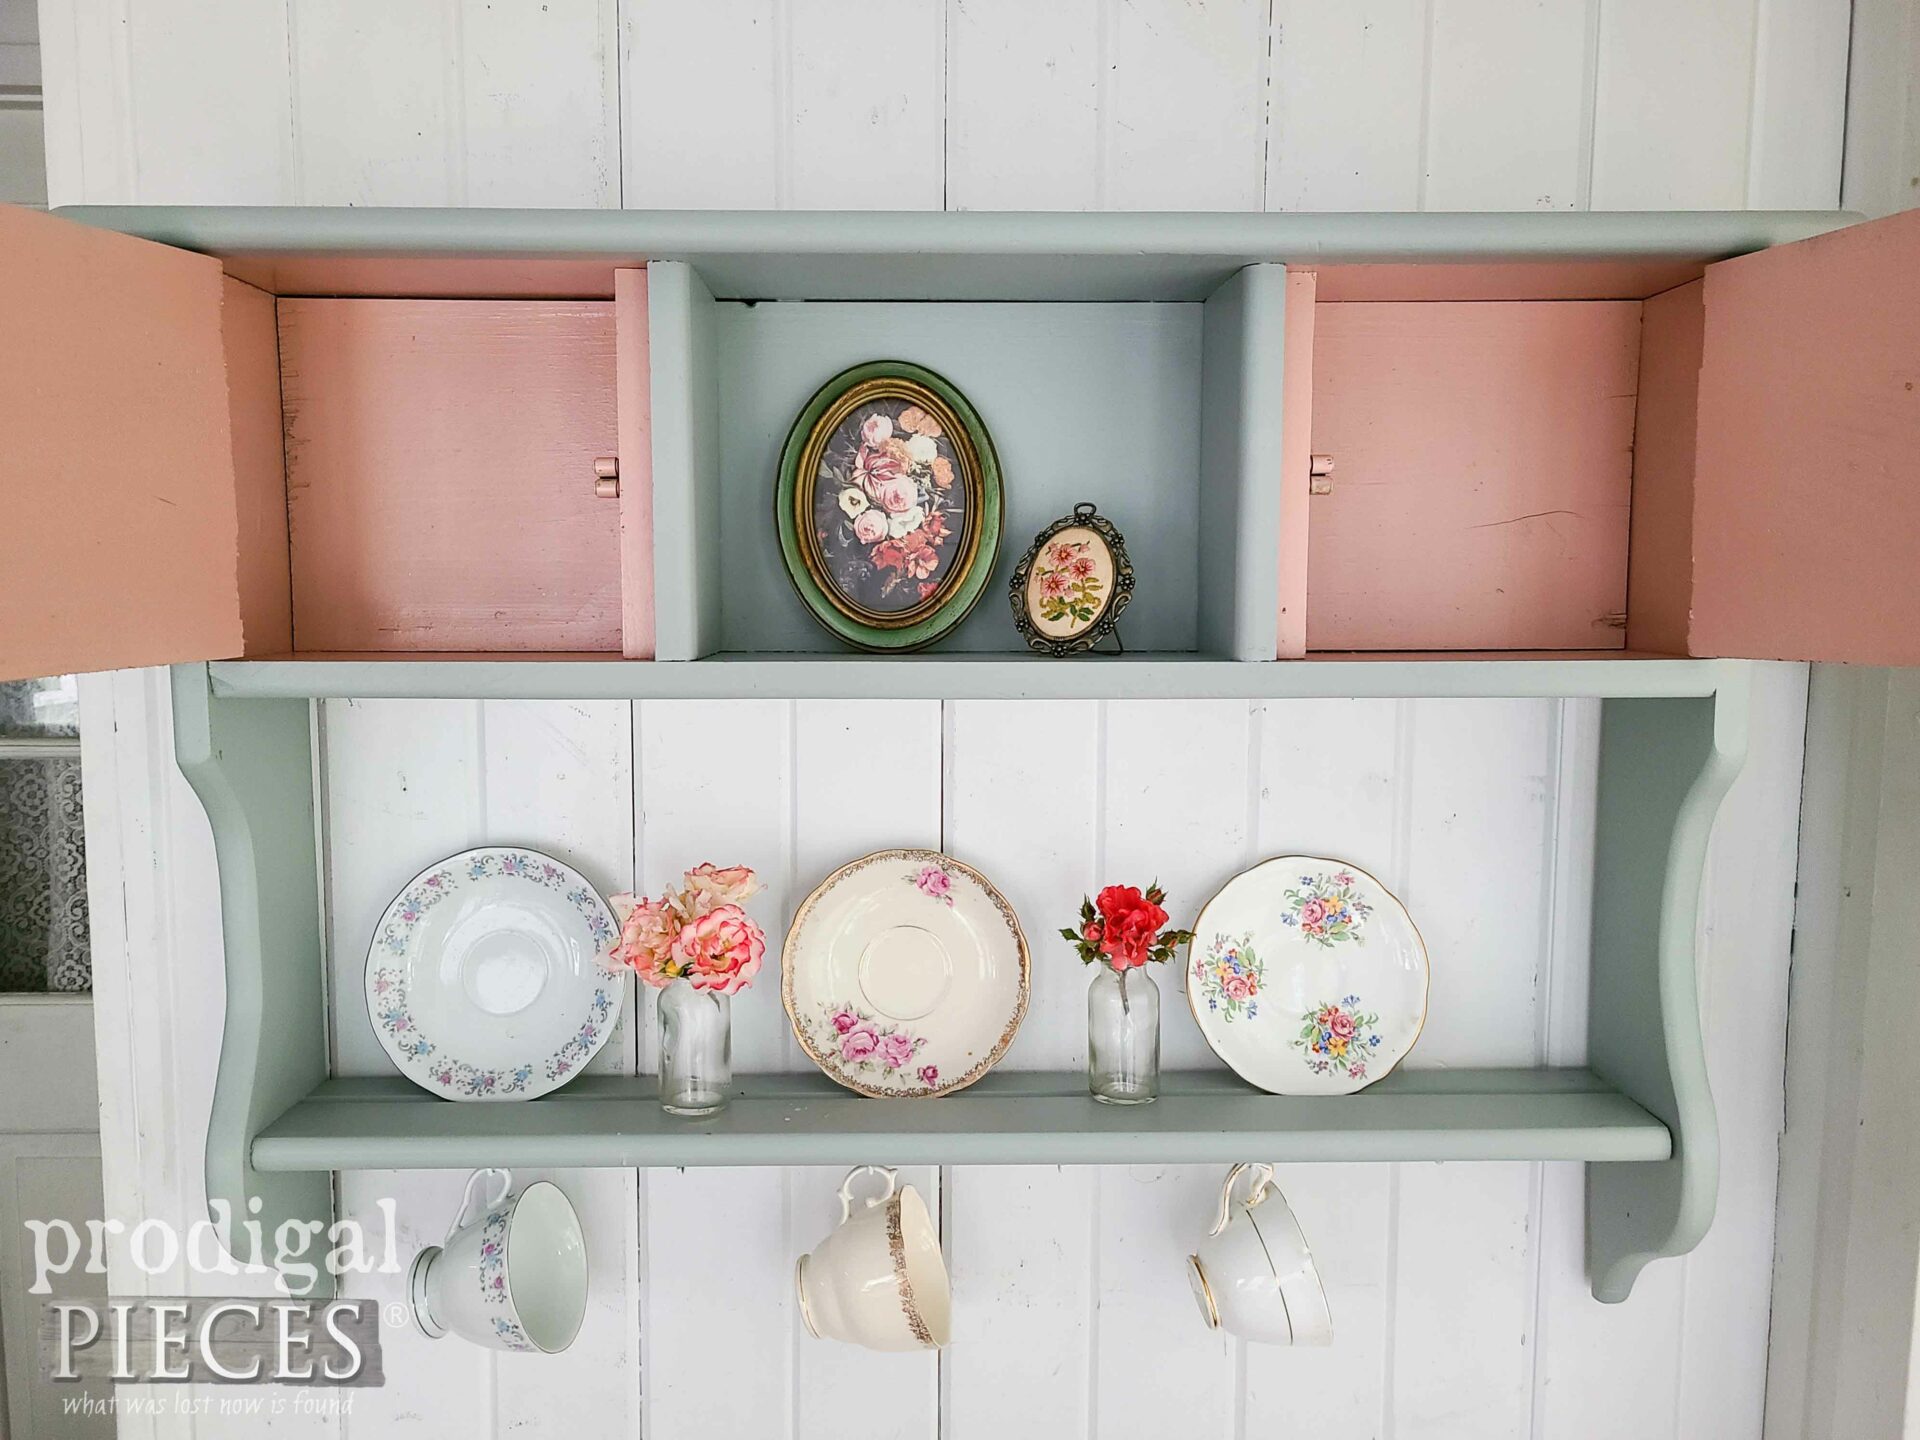 Open Vintage Cubby Shelf Doors in Pink by Larissa of Prodigal Pieces | prodigalpieces.com #prodigalpieces